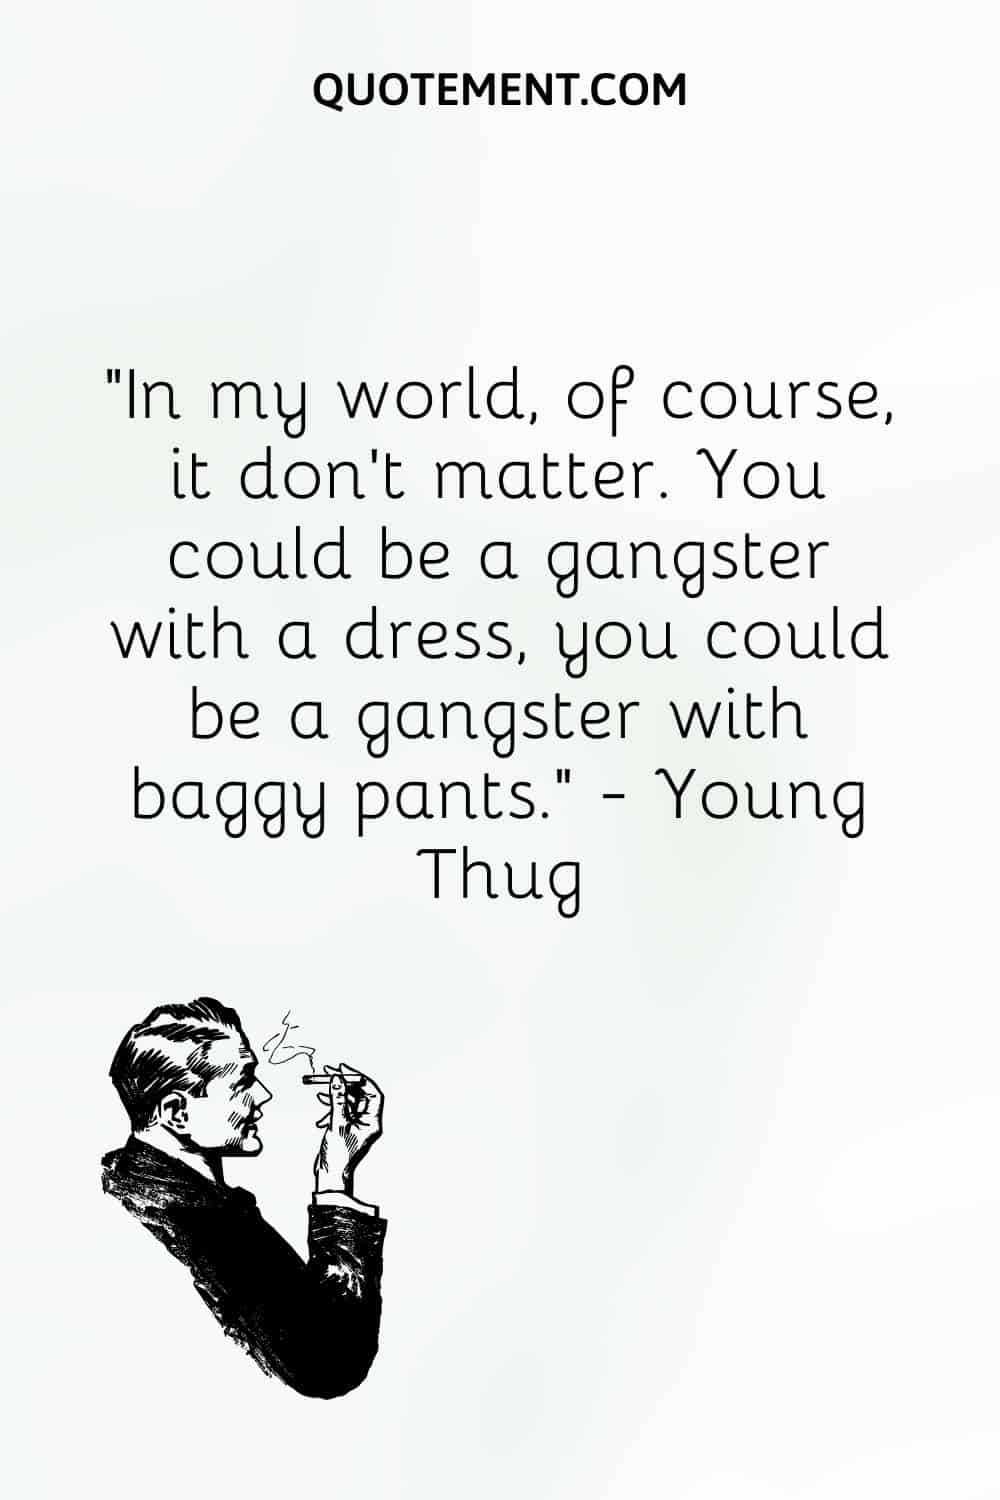 Illustration of a man with a cigarette representing thug quote